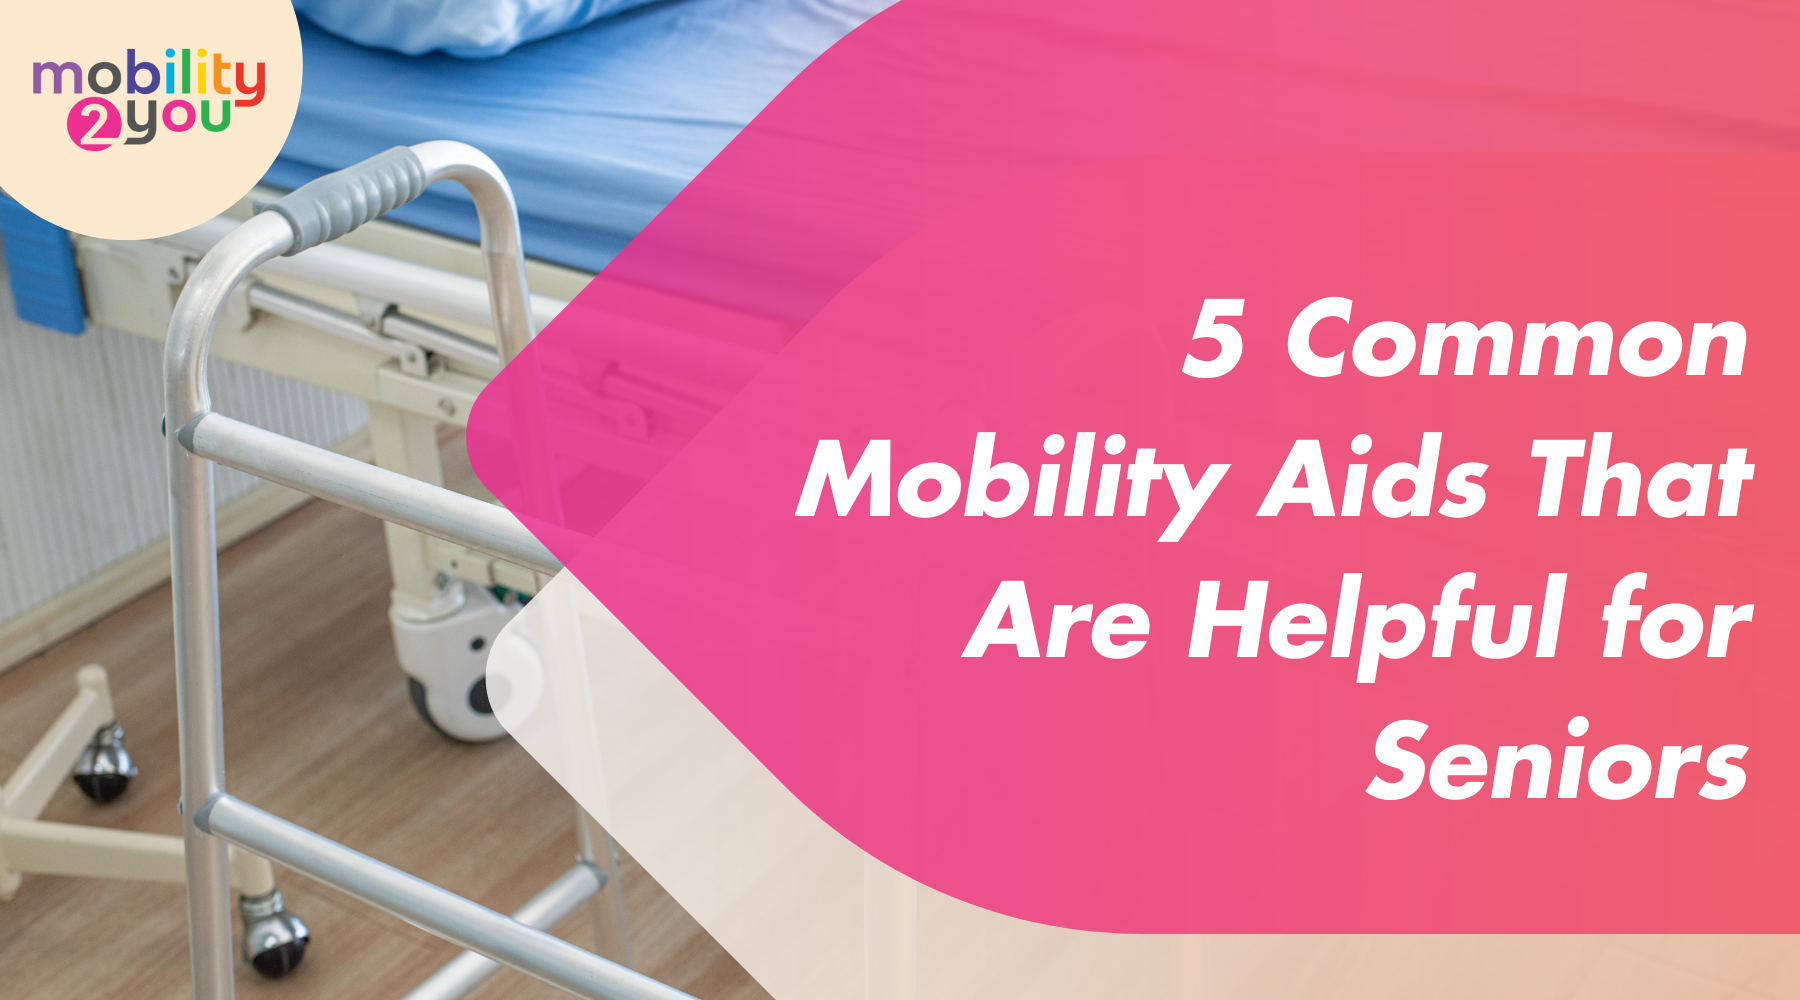 A collection of common mobility aids for seniors, including a rollator walker and a care bed, showcasing the variety of helpful options available to enhance mobility and independence.